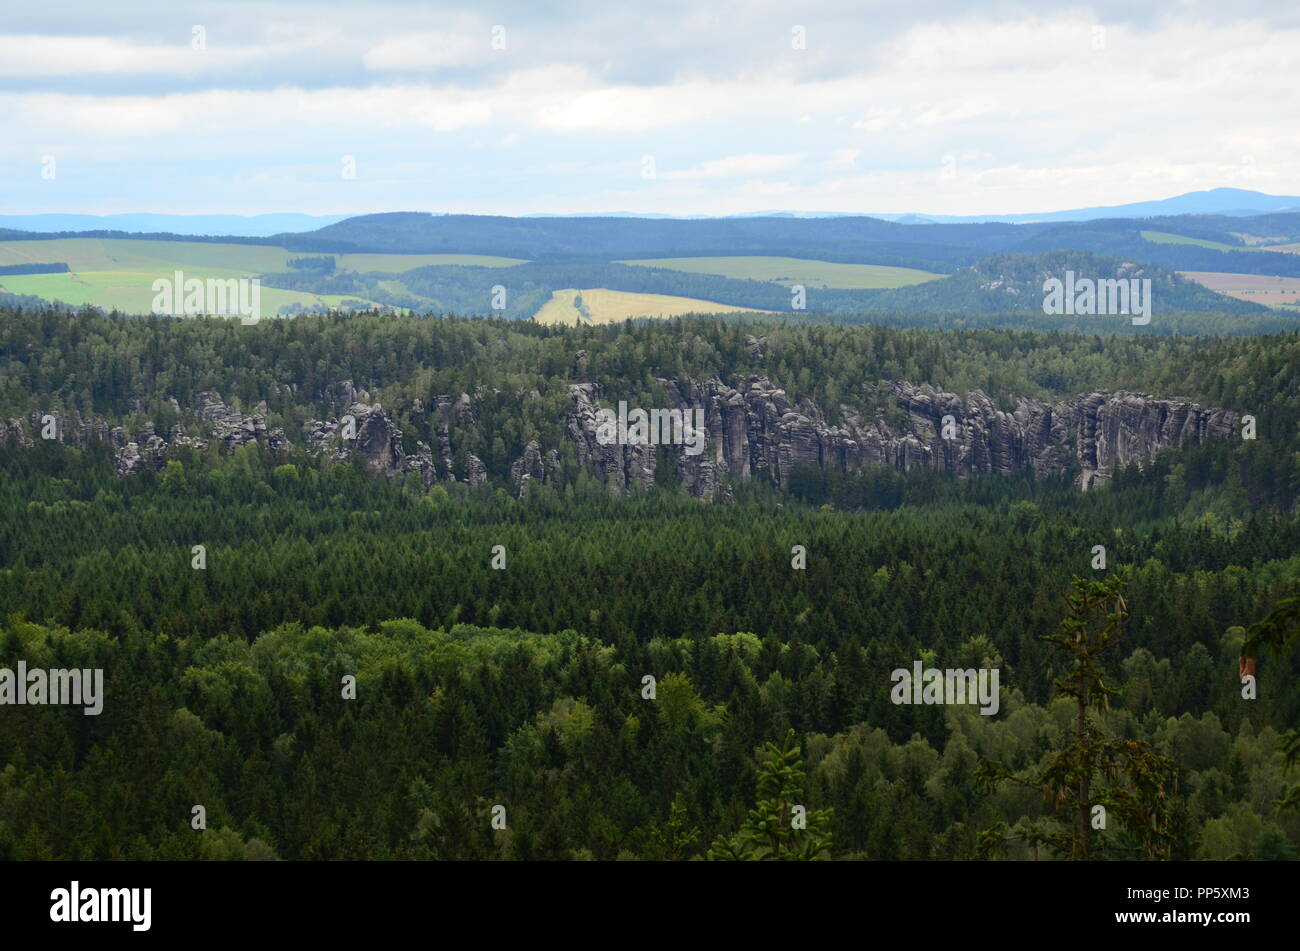 View on a rock wall in the middle of the forest and a tree with hanging cones. Croplands in the background. Stock Photo